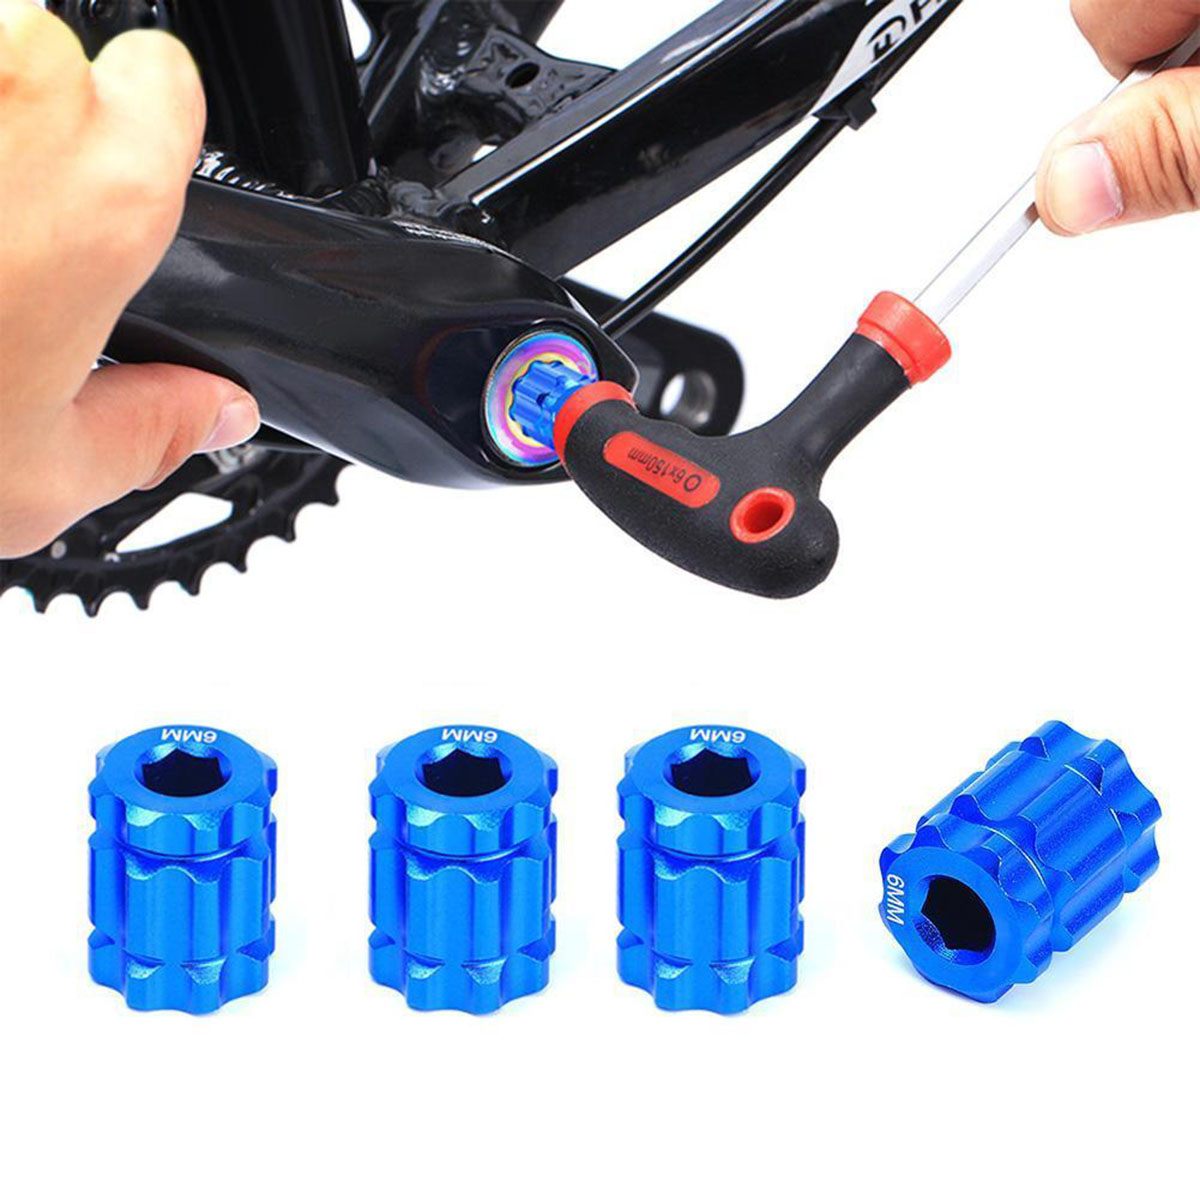 

BIKIGHT MTB Cycling Bicycle Crank Extractor Removal Tool Bicycle Bottom Bracket Installation Repair Tool